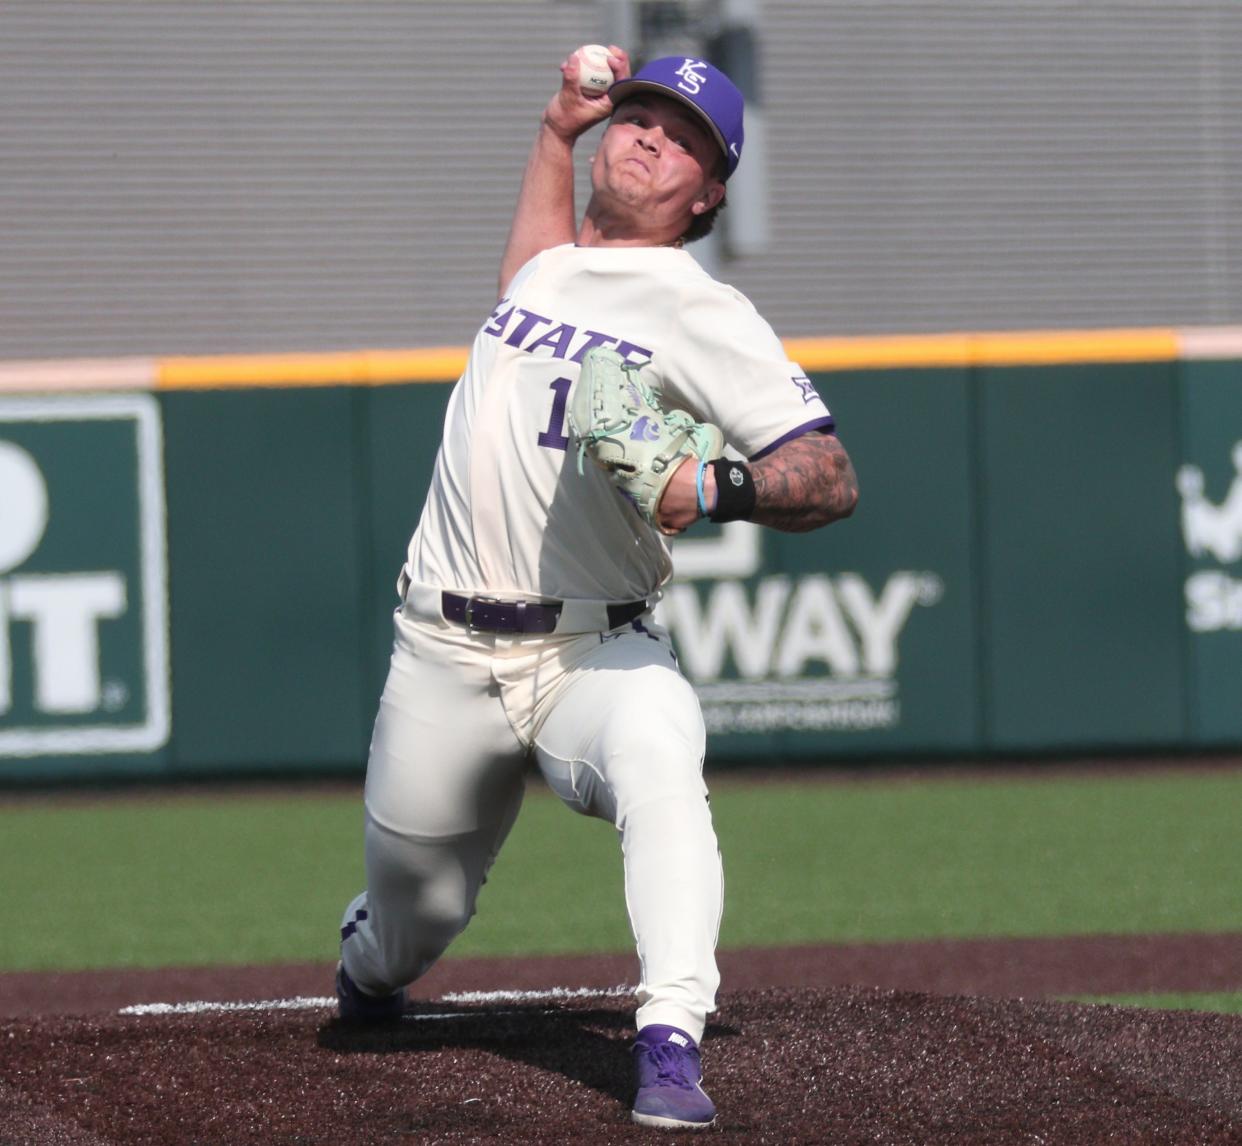 Kansas State pitcher Tyson Neighbors, a preseason all-America honoree by multiple outlets, returned last week after missing a month with an oblique injury. He's one of several Big 12 stars who were sidelined in the first month.